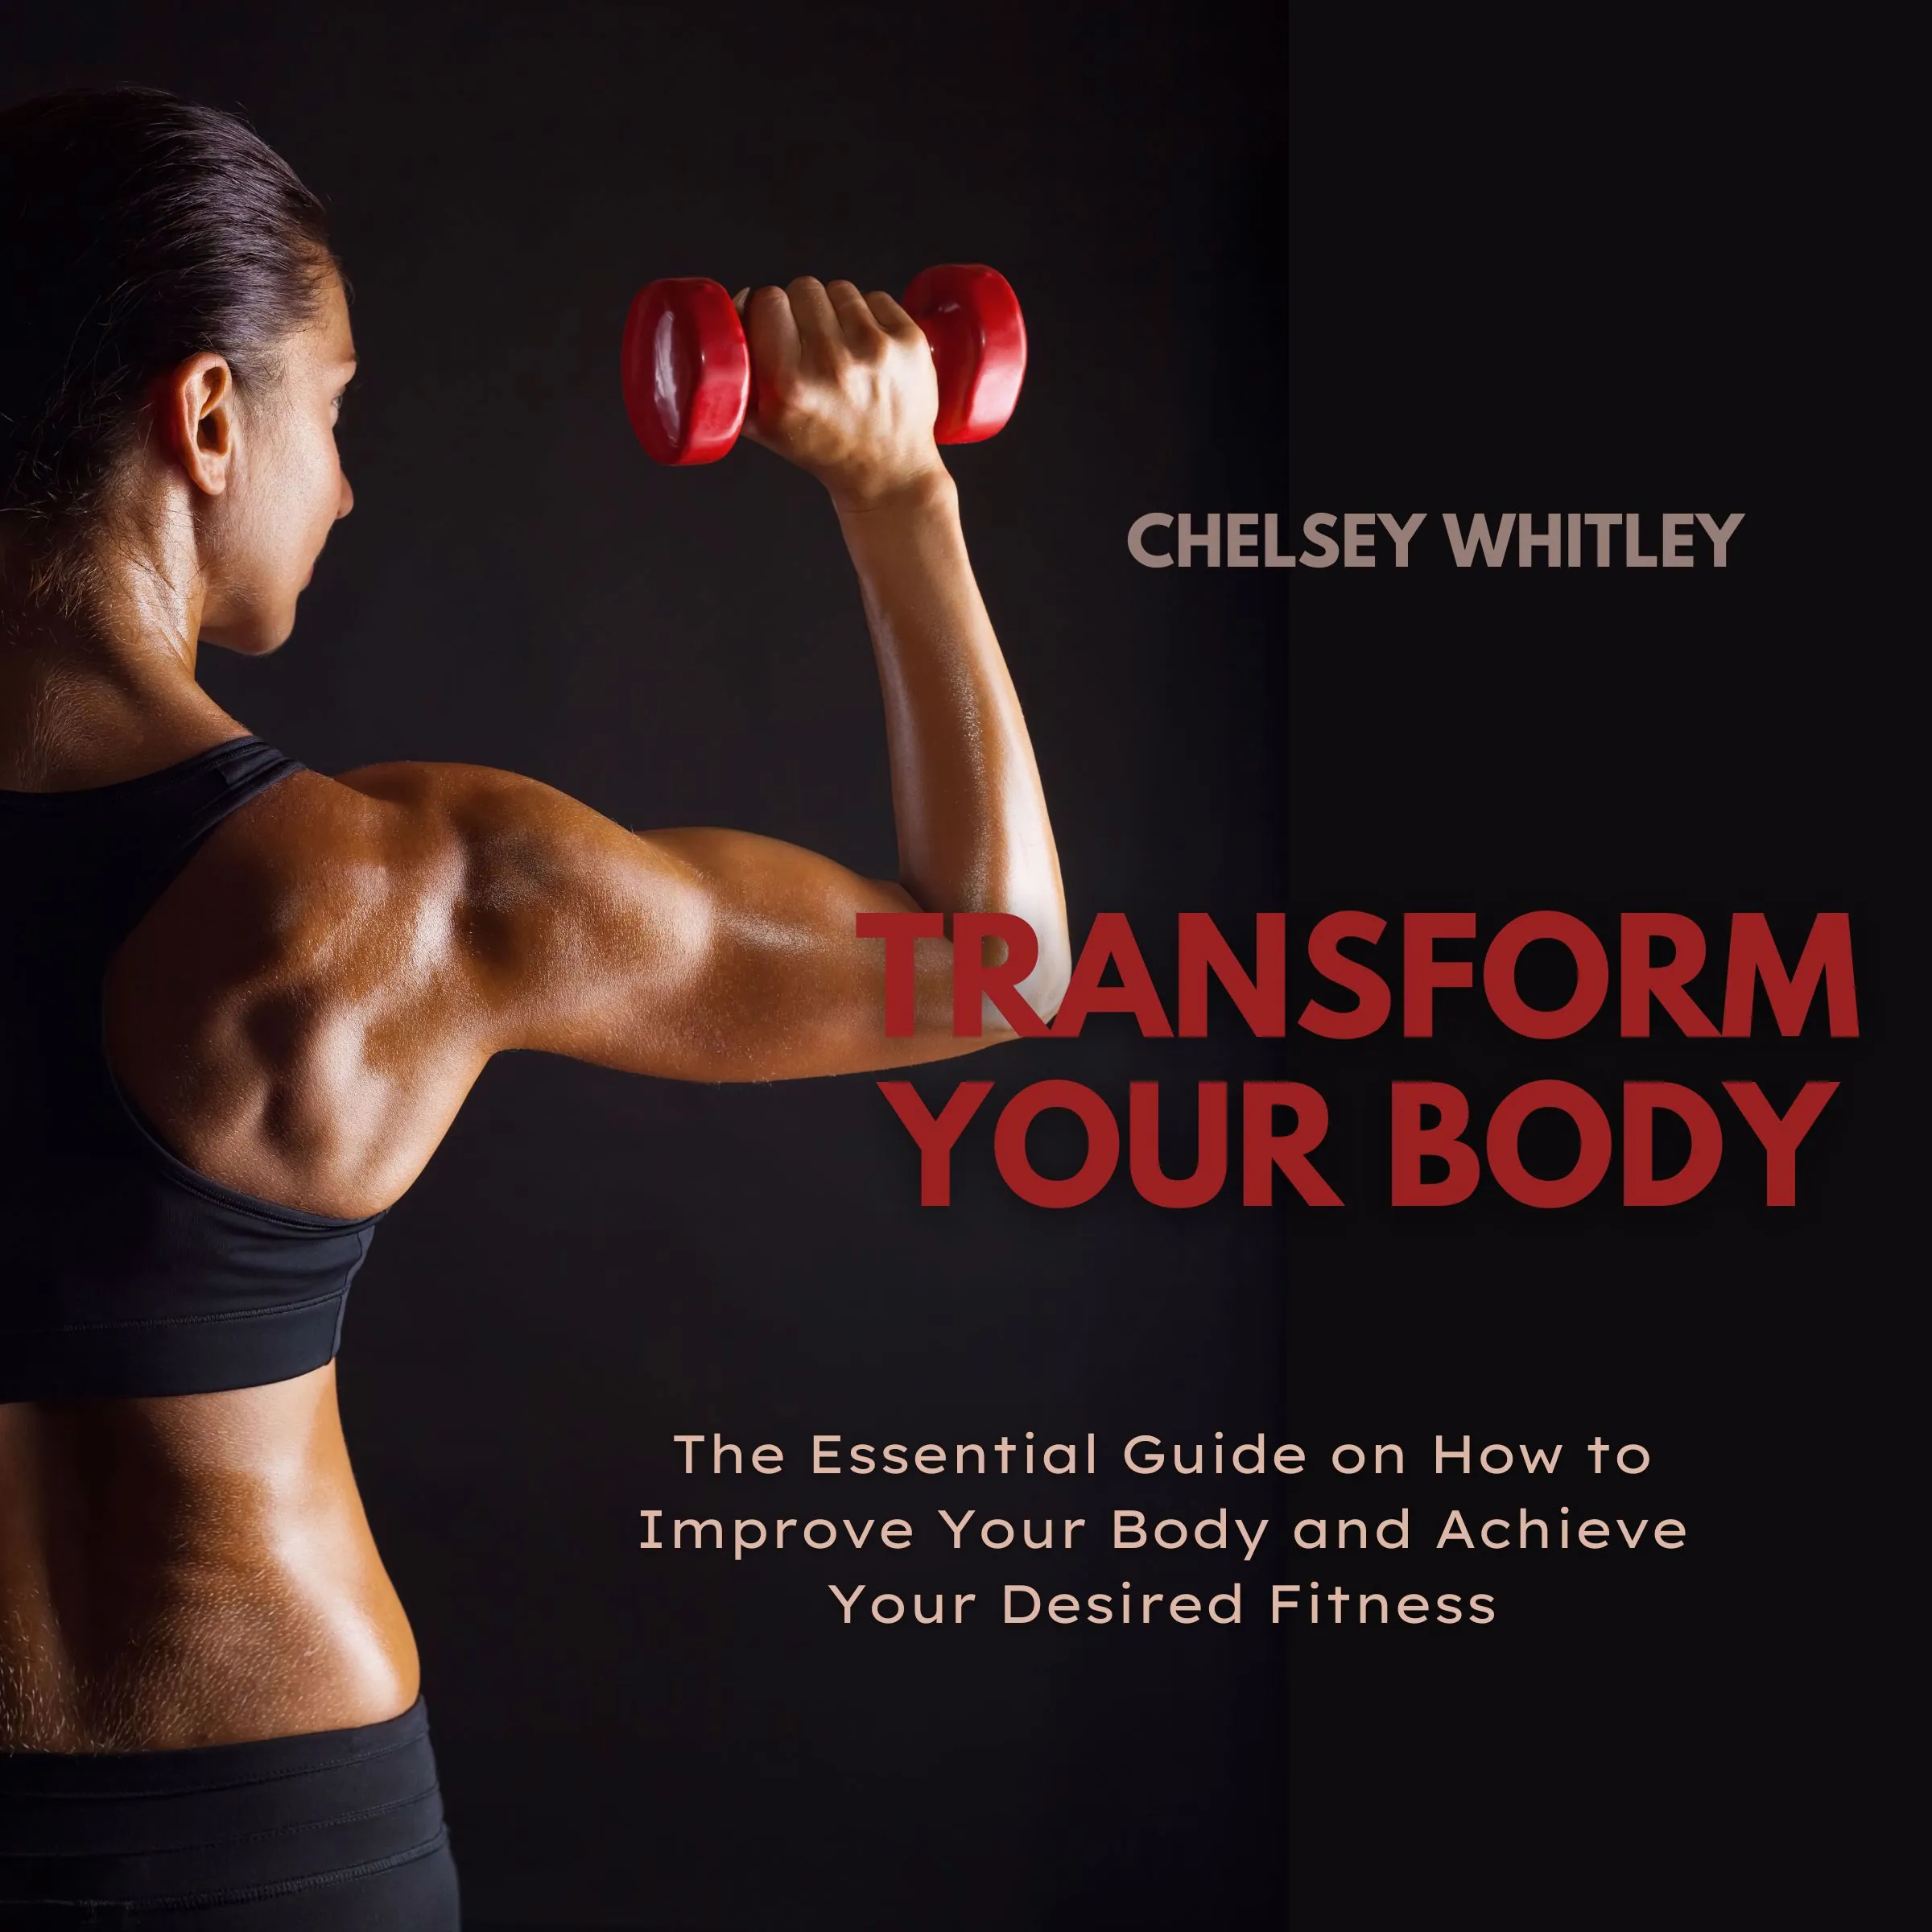 Transform Your Body by Chelsey Whitley Audiobook